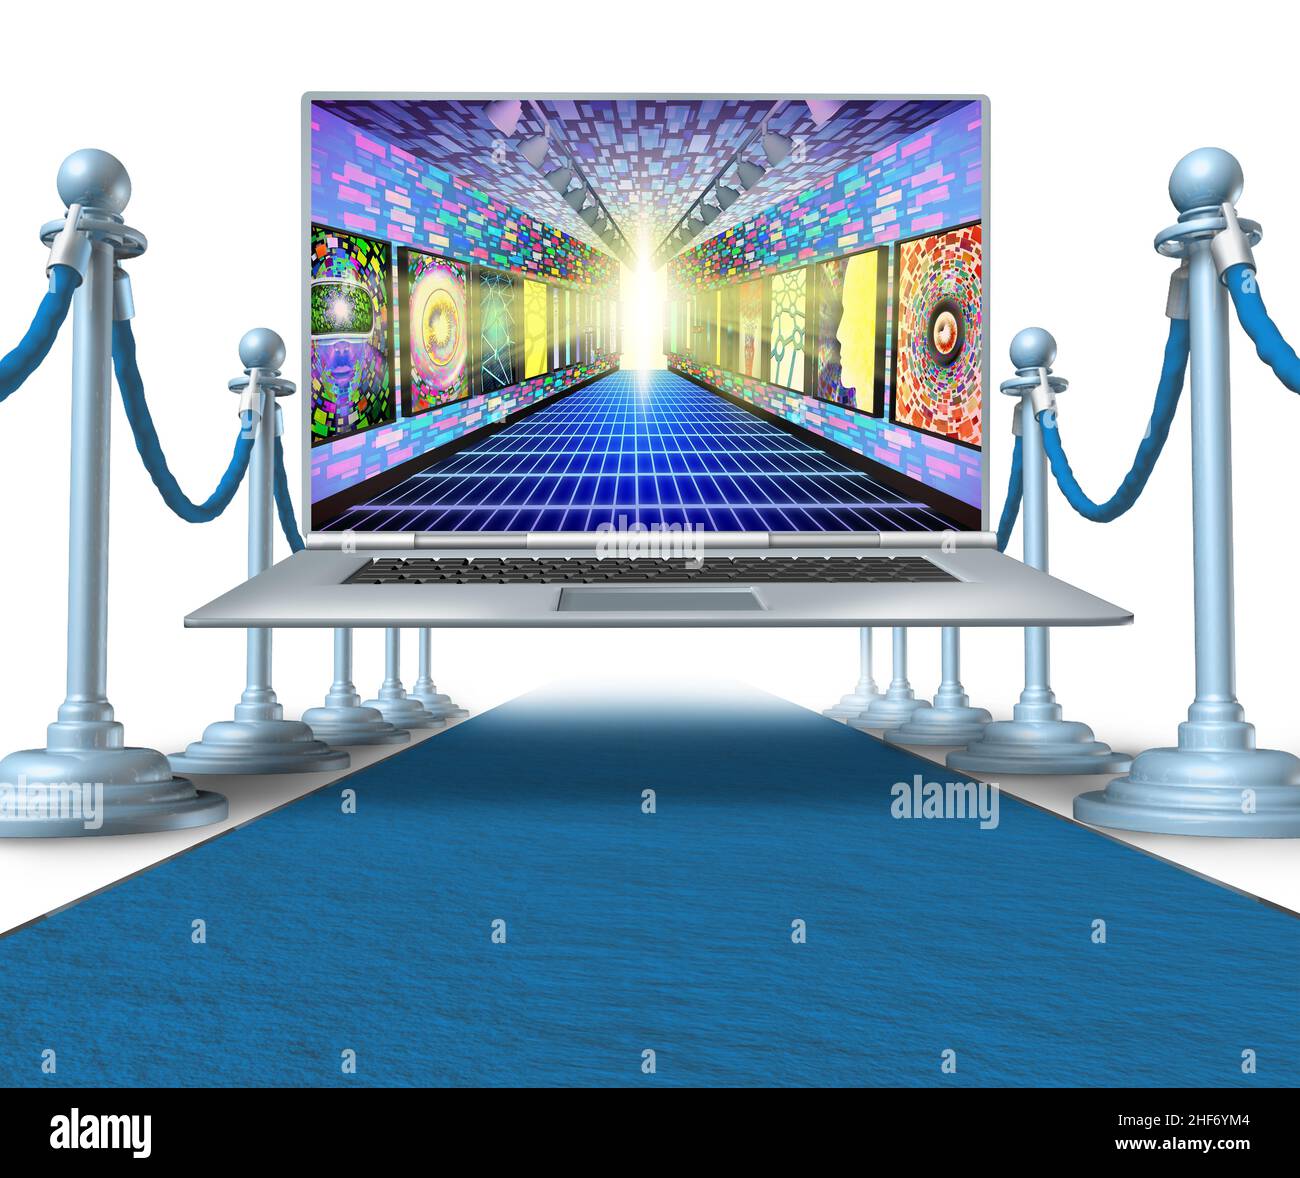 Online Art Gallery and virtual museum concept as a web exhibition of artistic digital content as an interactive metaverse experience with NFT crypto. Stock Photo